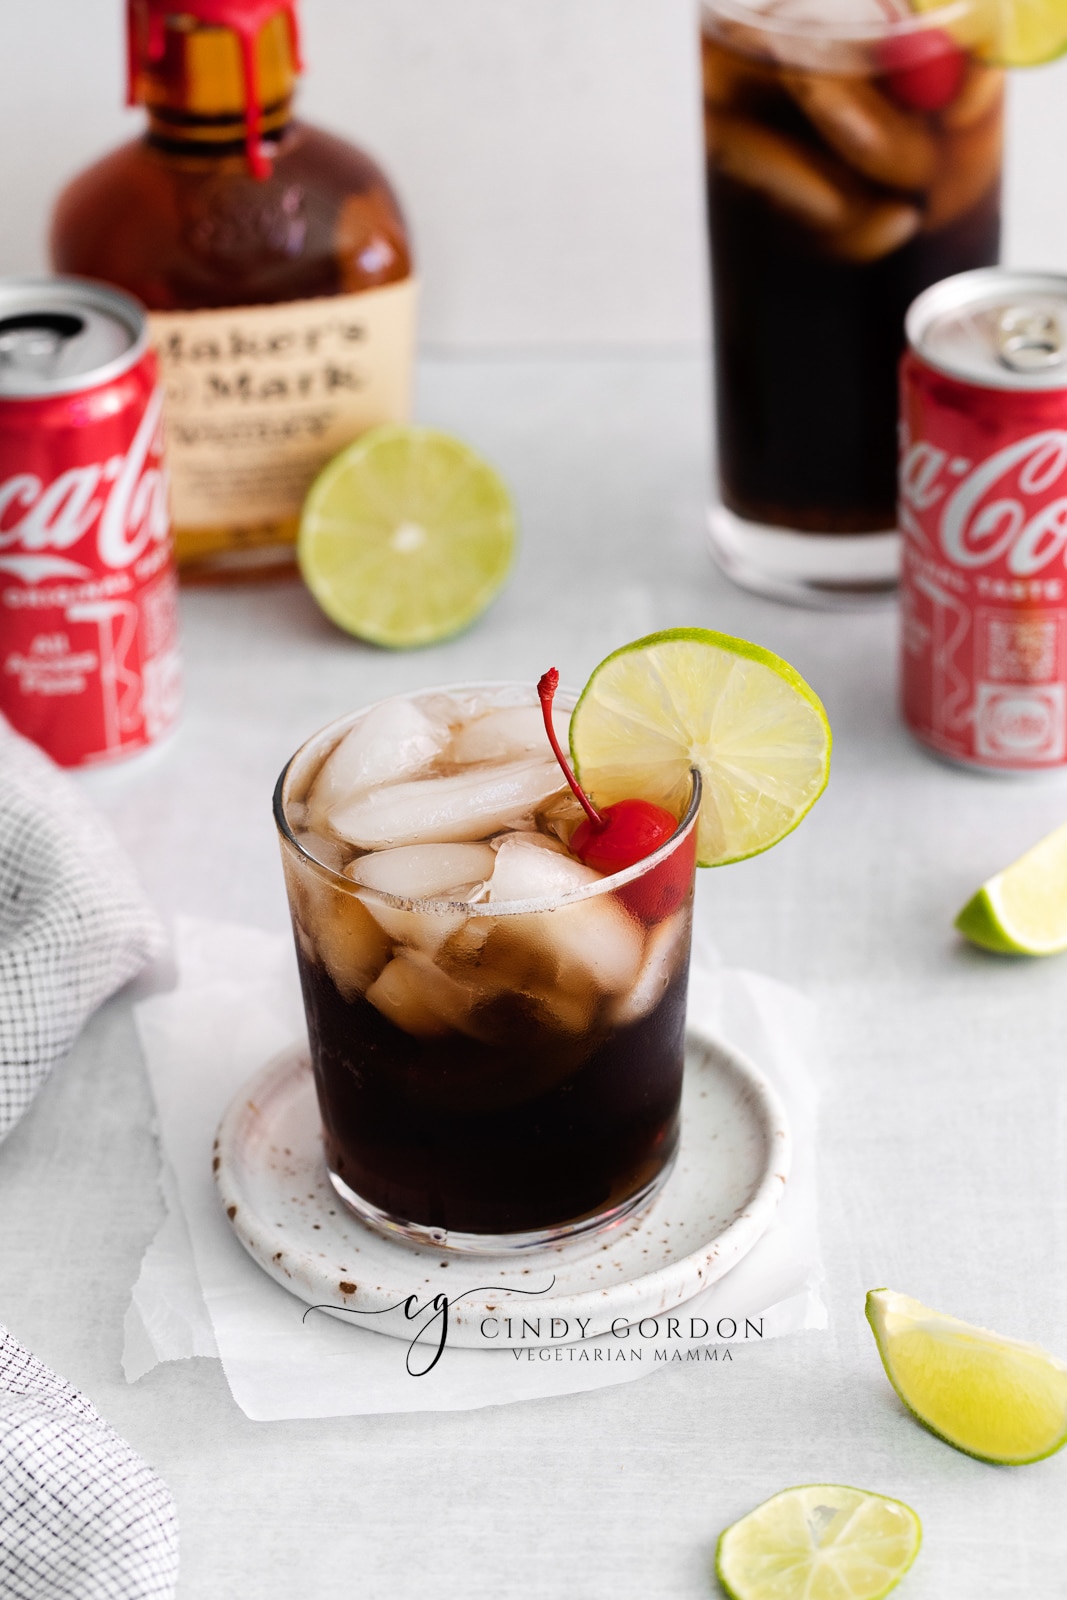 medium clear glass filled with half moon ice cubes and brown liquid. Lime wheel and one cherry in glass coke cans in back along with whiskey bottle Tall glass in background with whiskey in coke